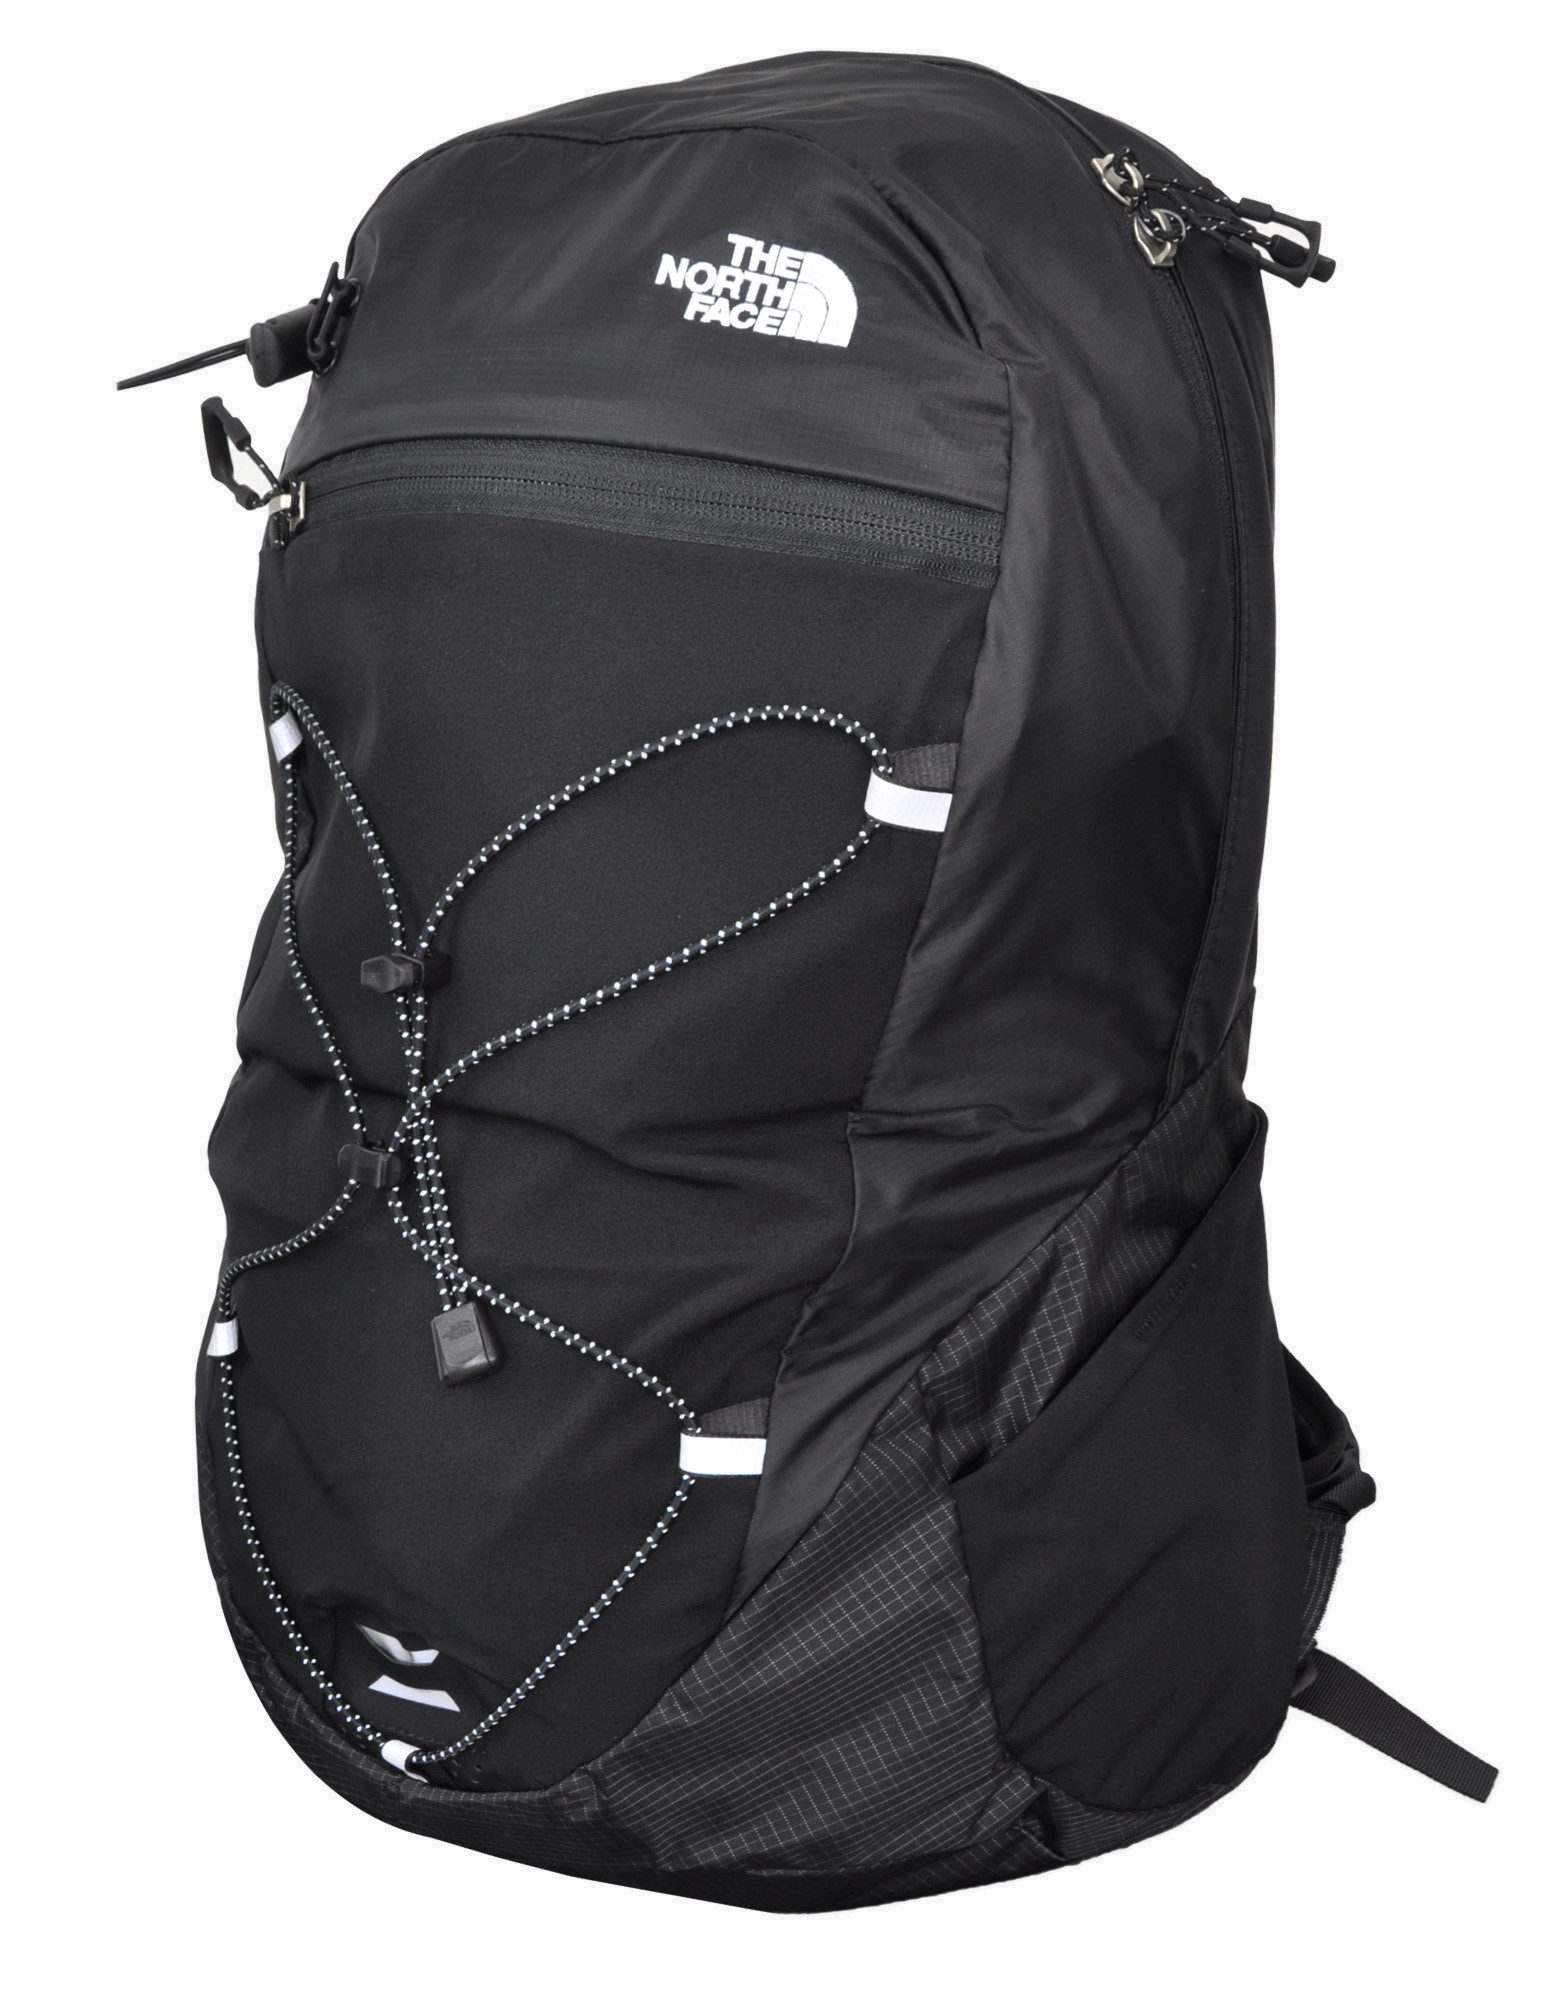 Angstrom 20L Backpack by The north face 